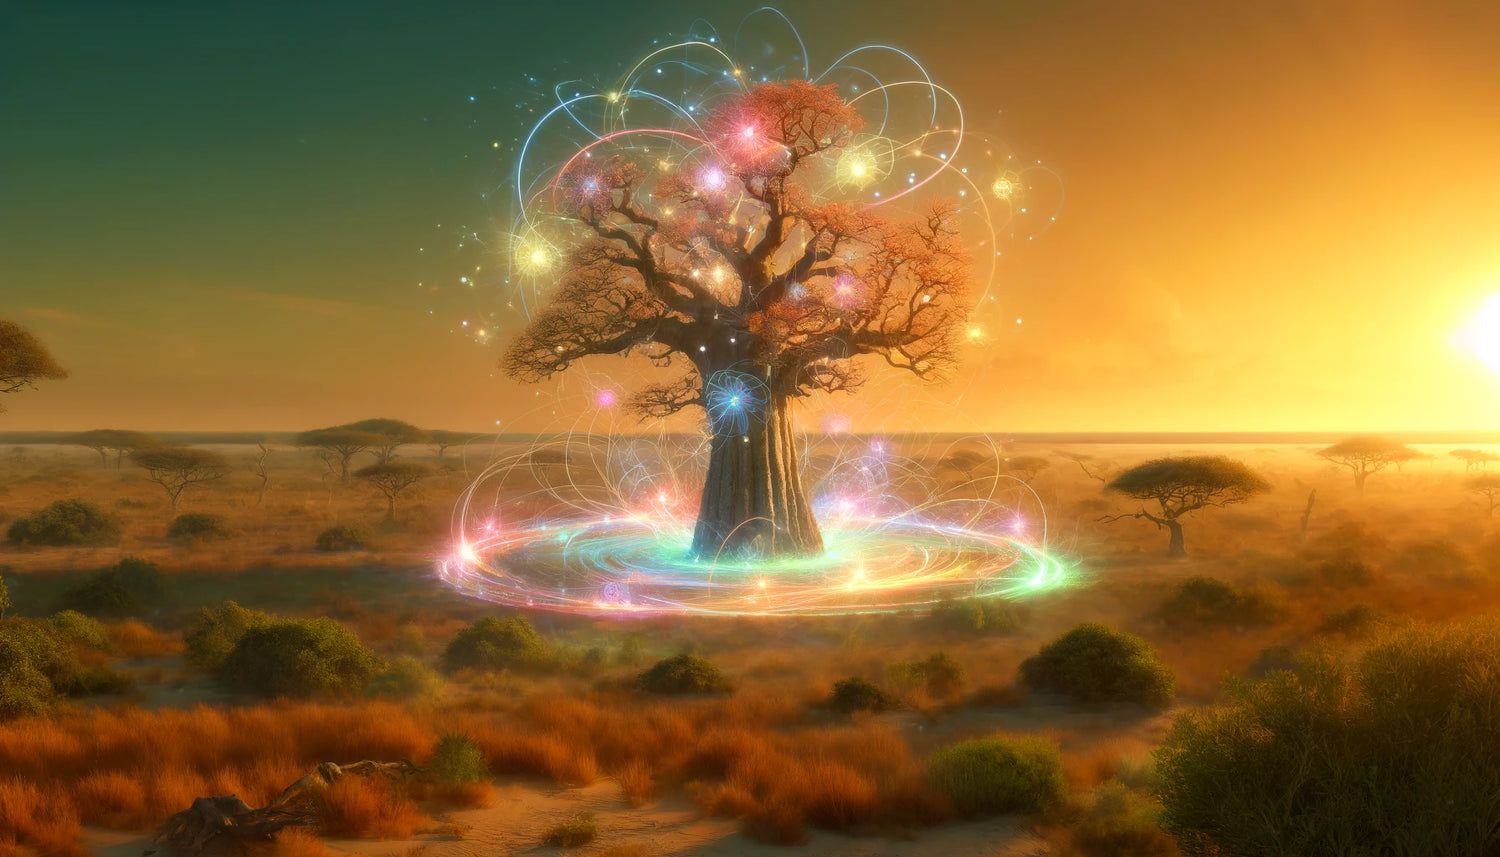 The Power of Baobab: The “Tree of Life”